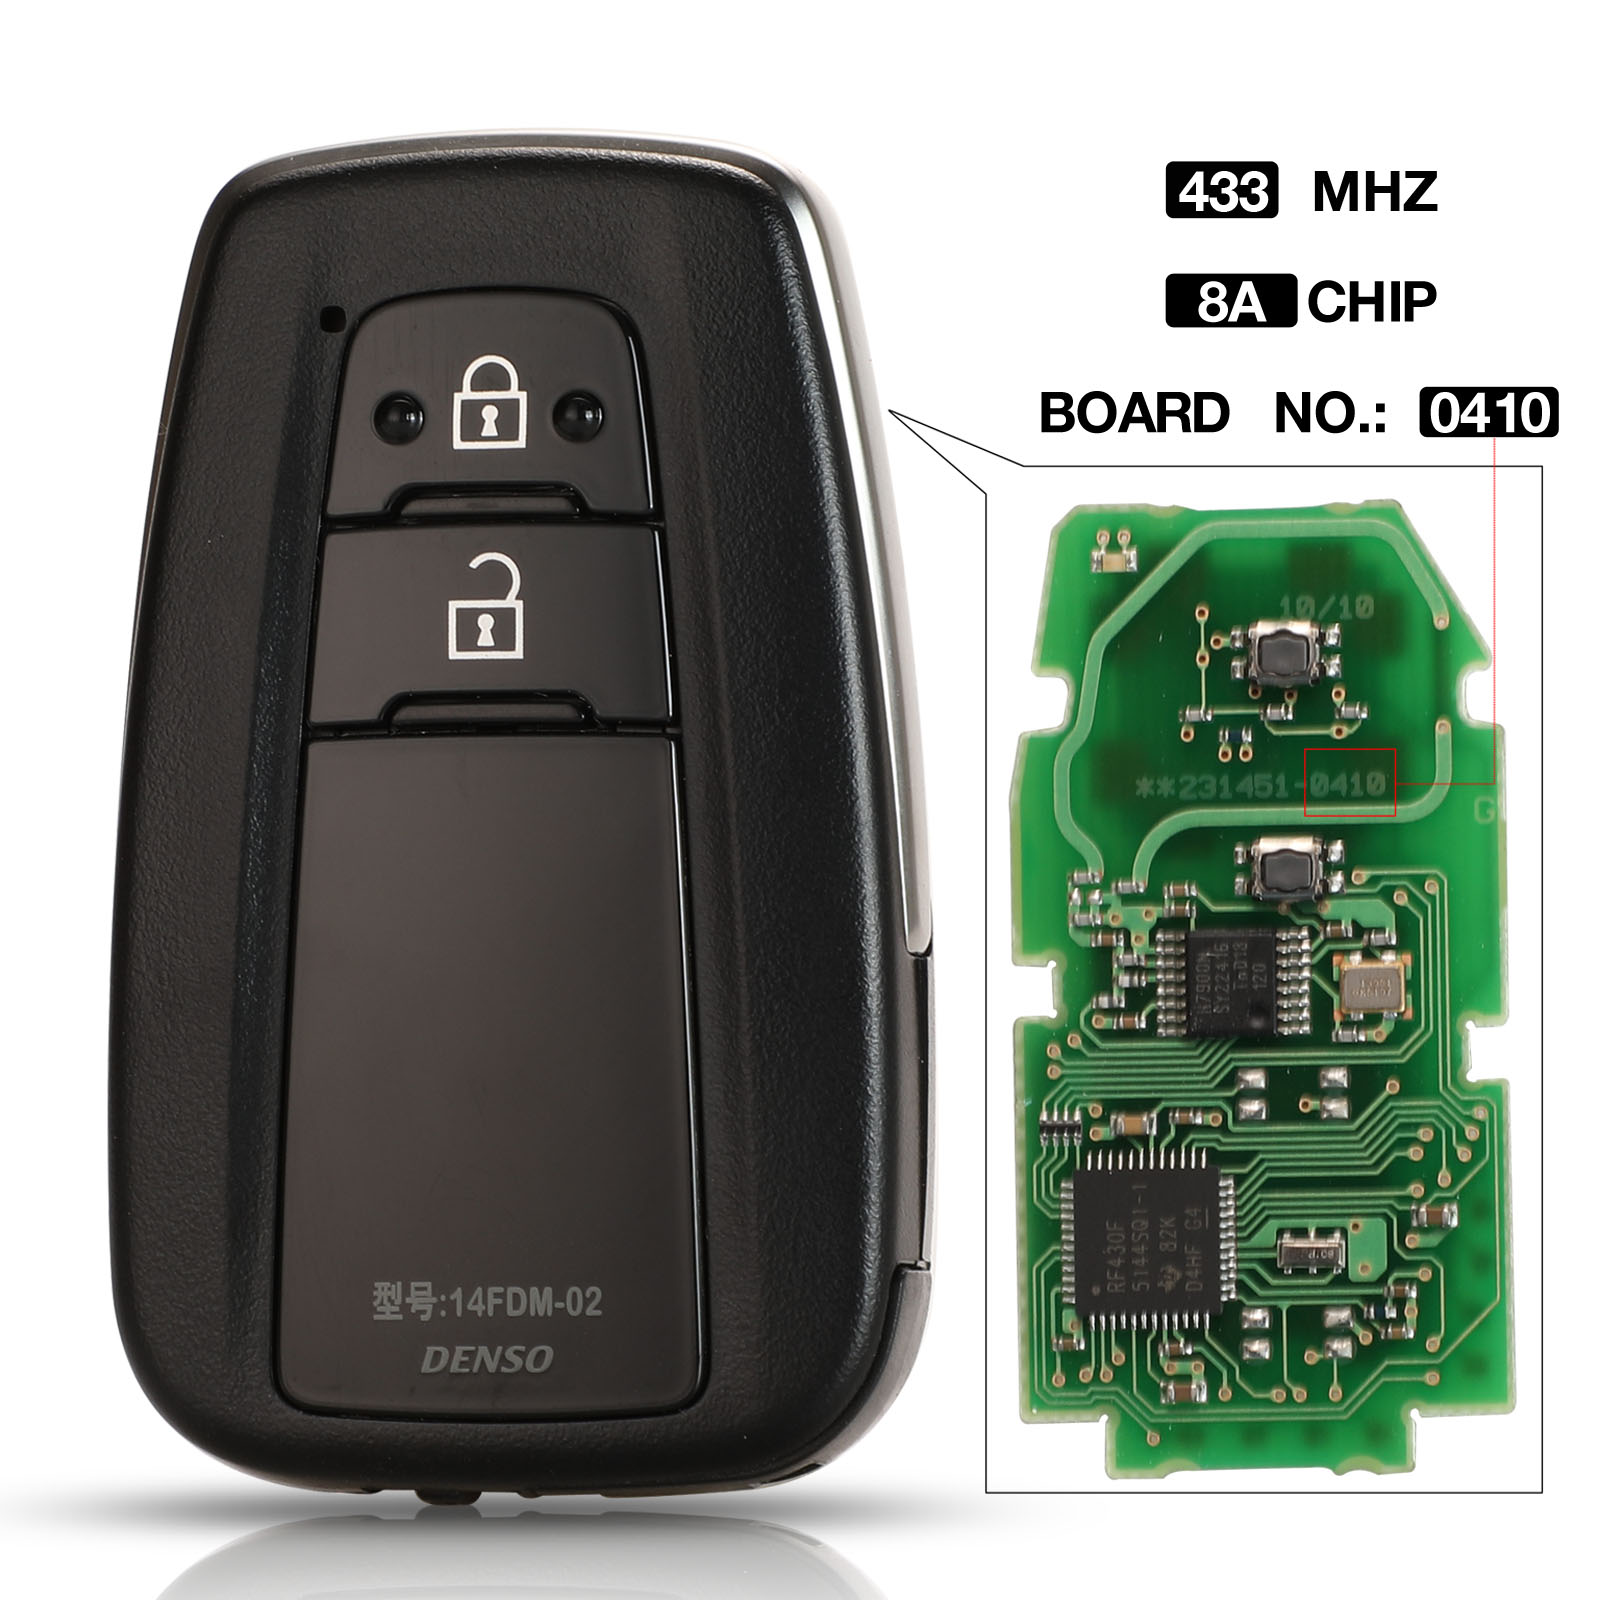 Remote Car Key ASK 433MHz 8A Chip For Toyota CHR C-HR IzoA 2018-2020 No. 0410 Board Keyless-Go 2 Buttons Smart Fob